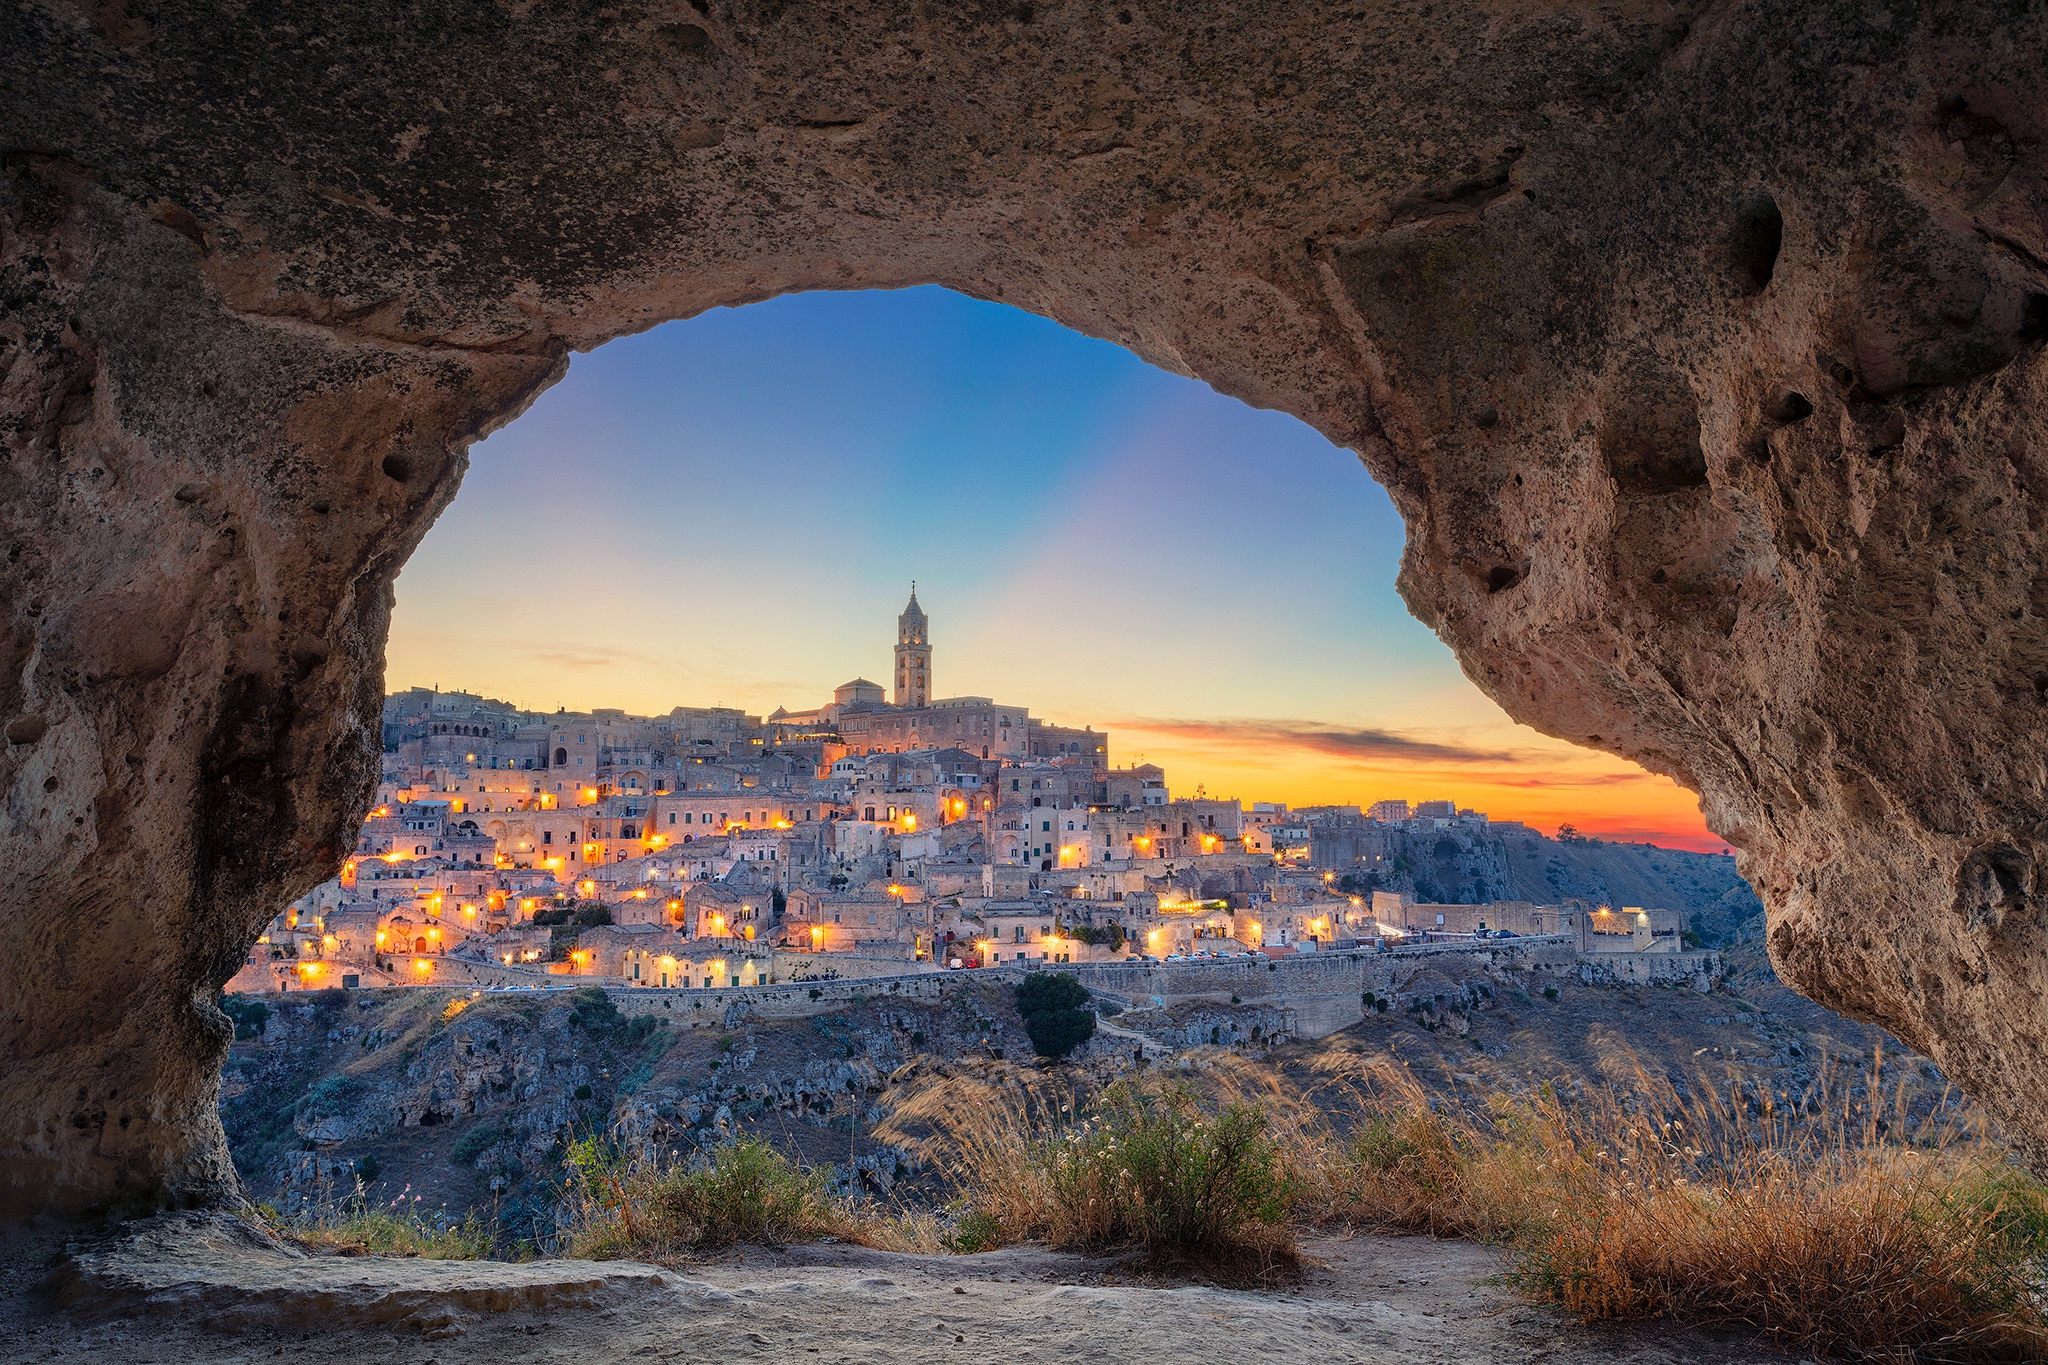 General 2048x1365 Italy Matera cave rocks town shrubs cityscape city lights tower evening